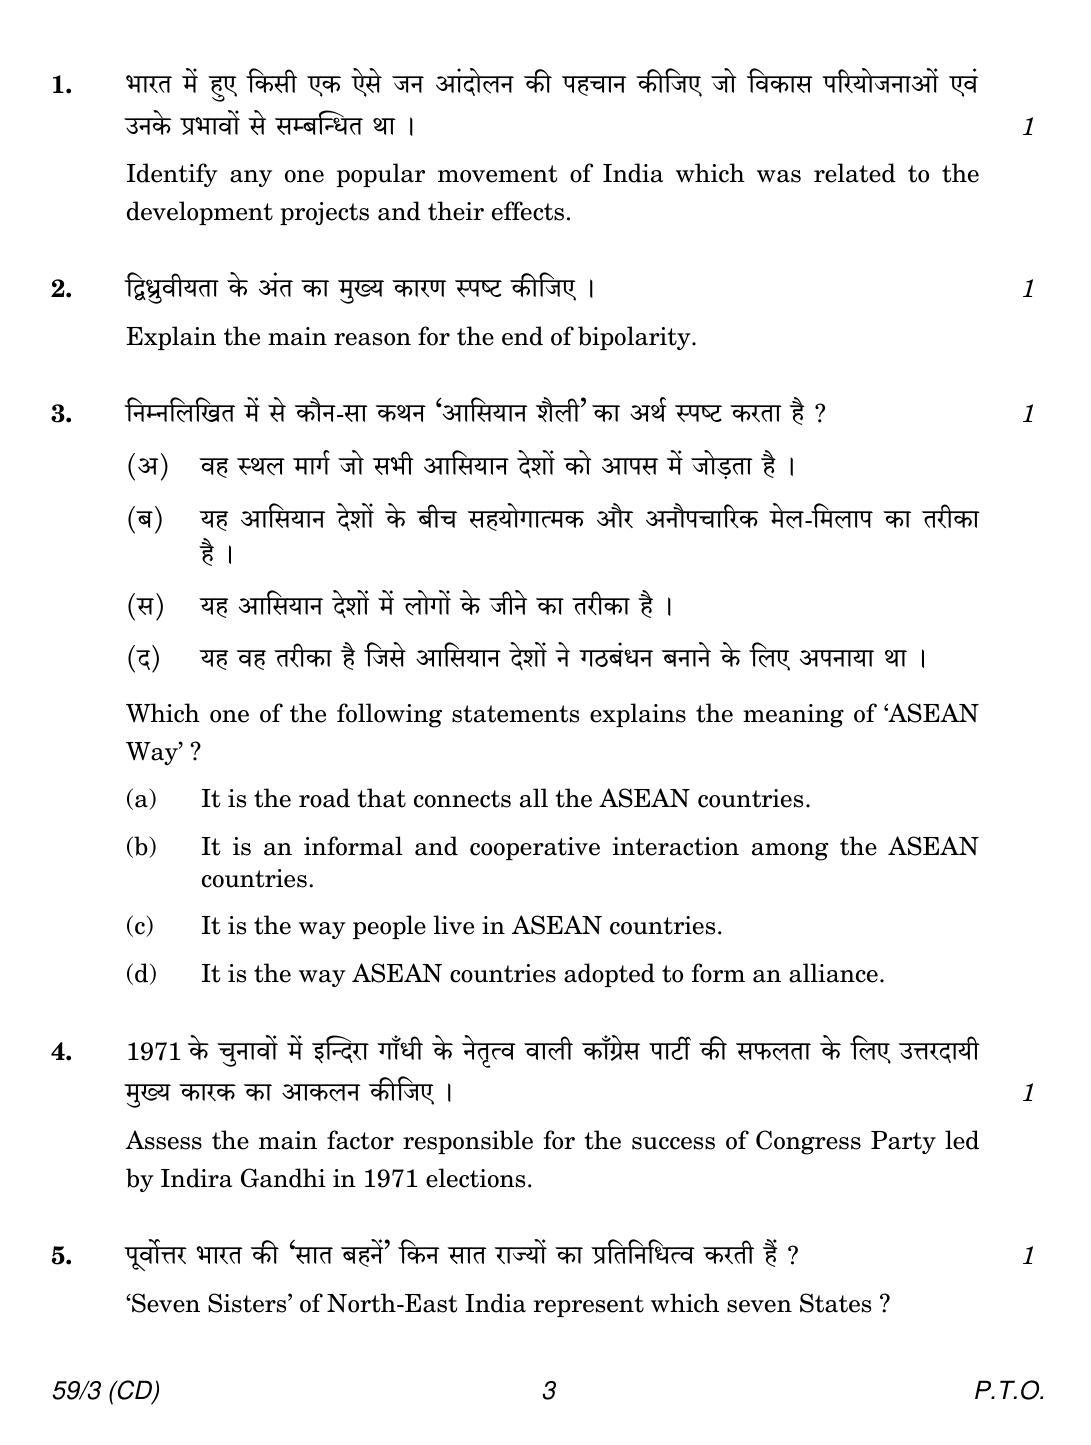 CBSE Class 12 59-3 POLITICAL SCIENCE CD 2018 Question Paper - Page 3